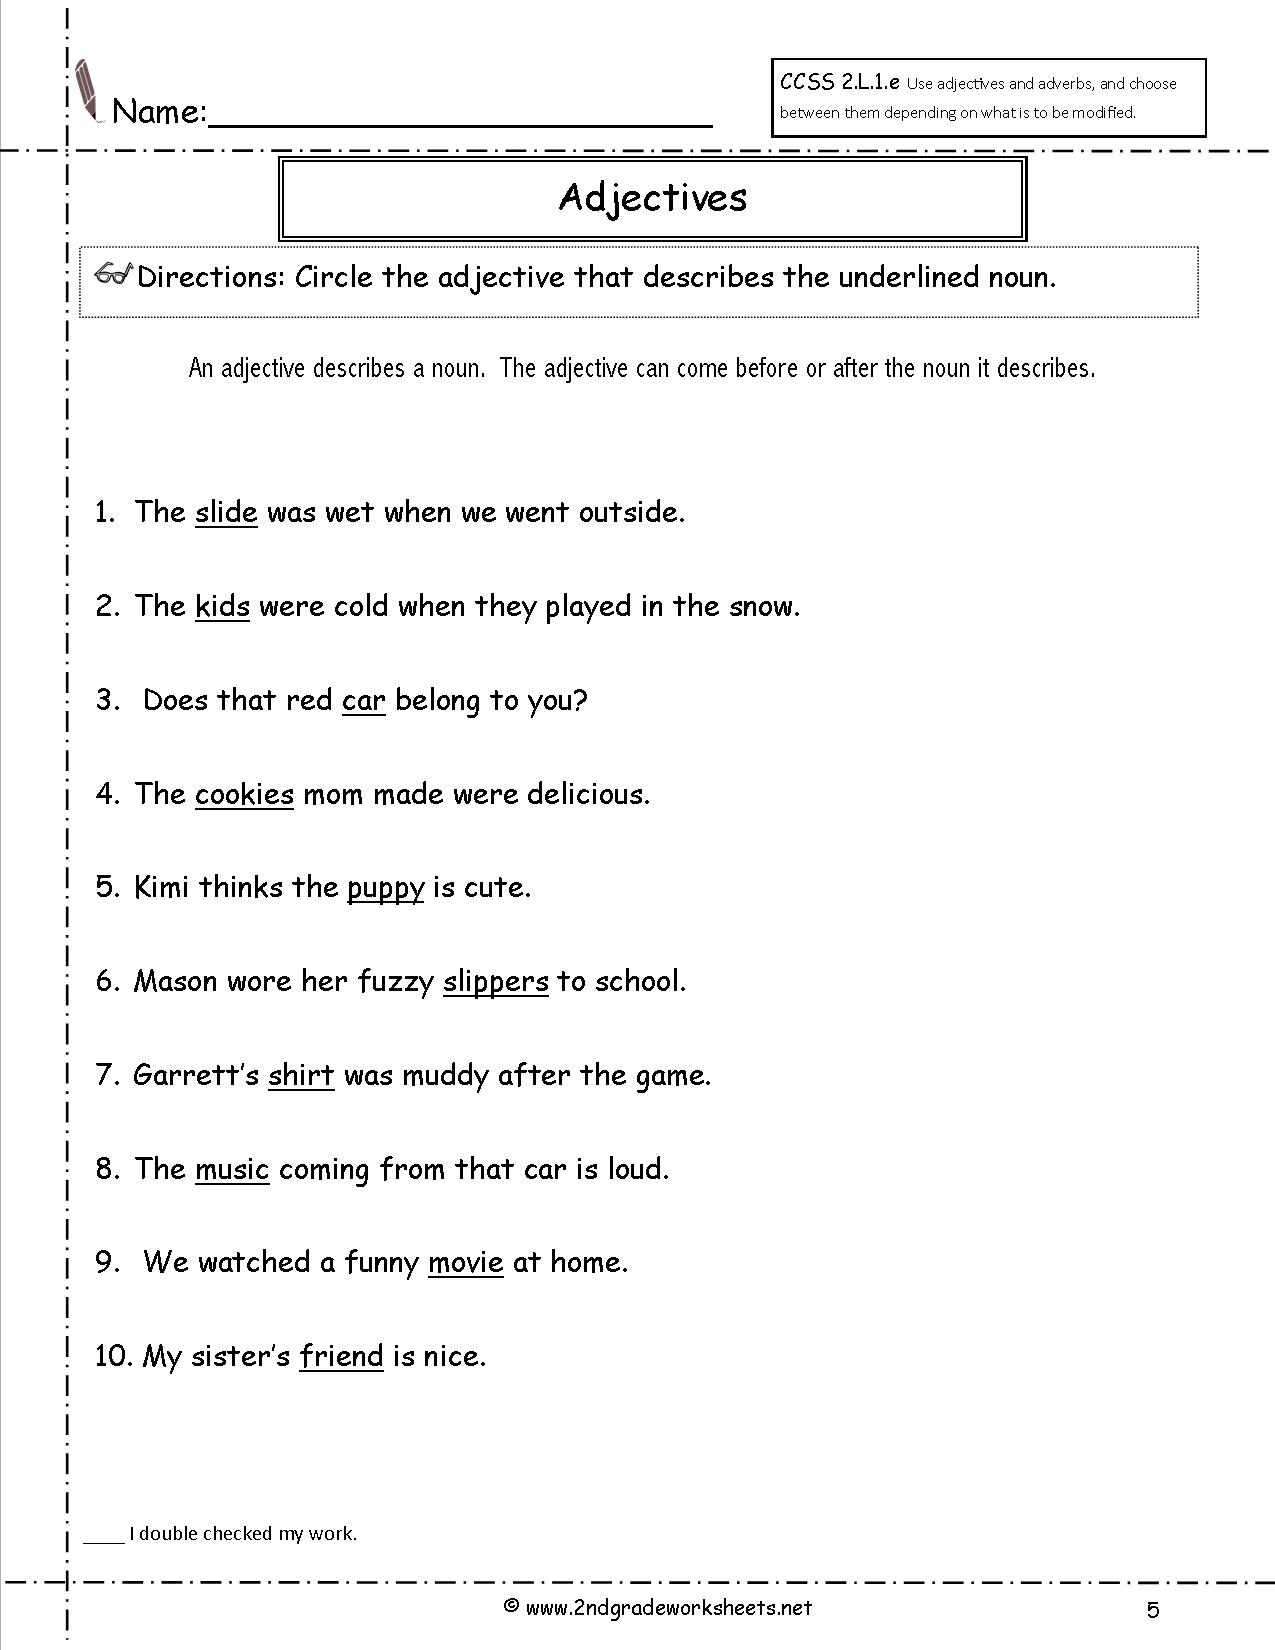 nouns-and-adjectives-worksheets-clear-concise-visual-with-answers